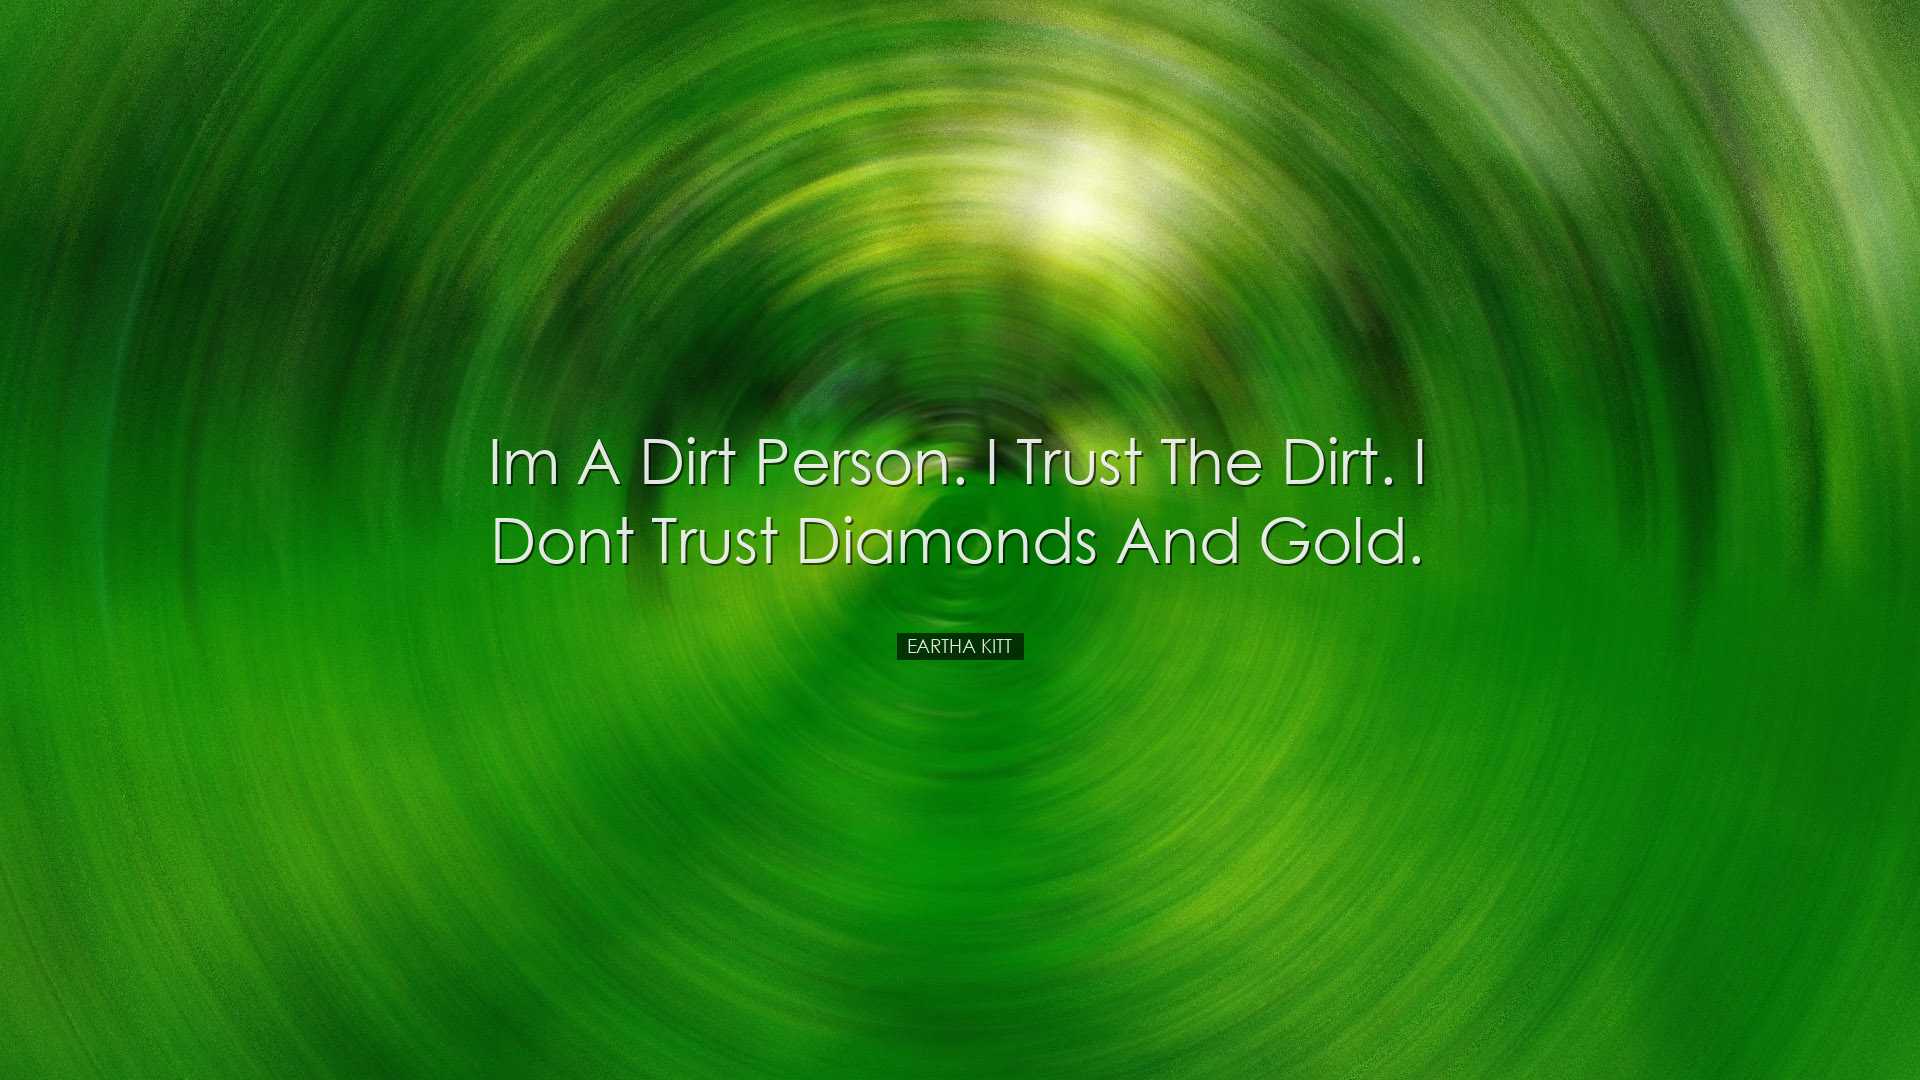 Im a dirt person. I trust the dirt. I dont trust diamonds and gold